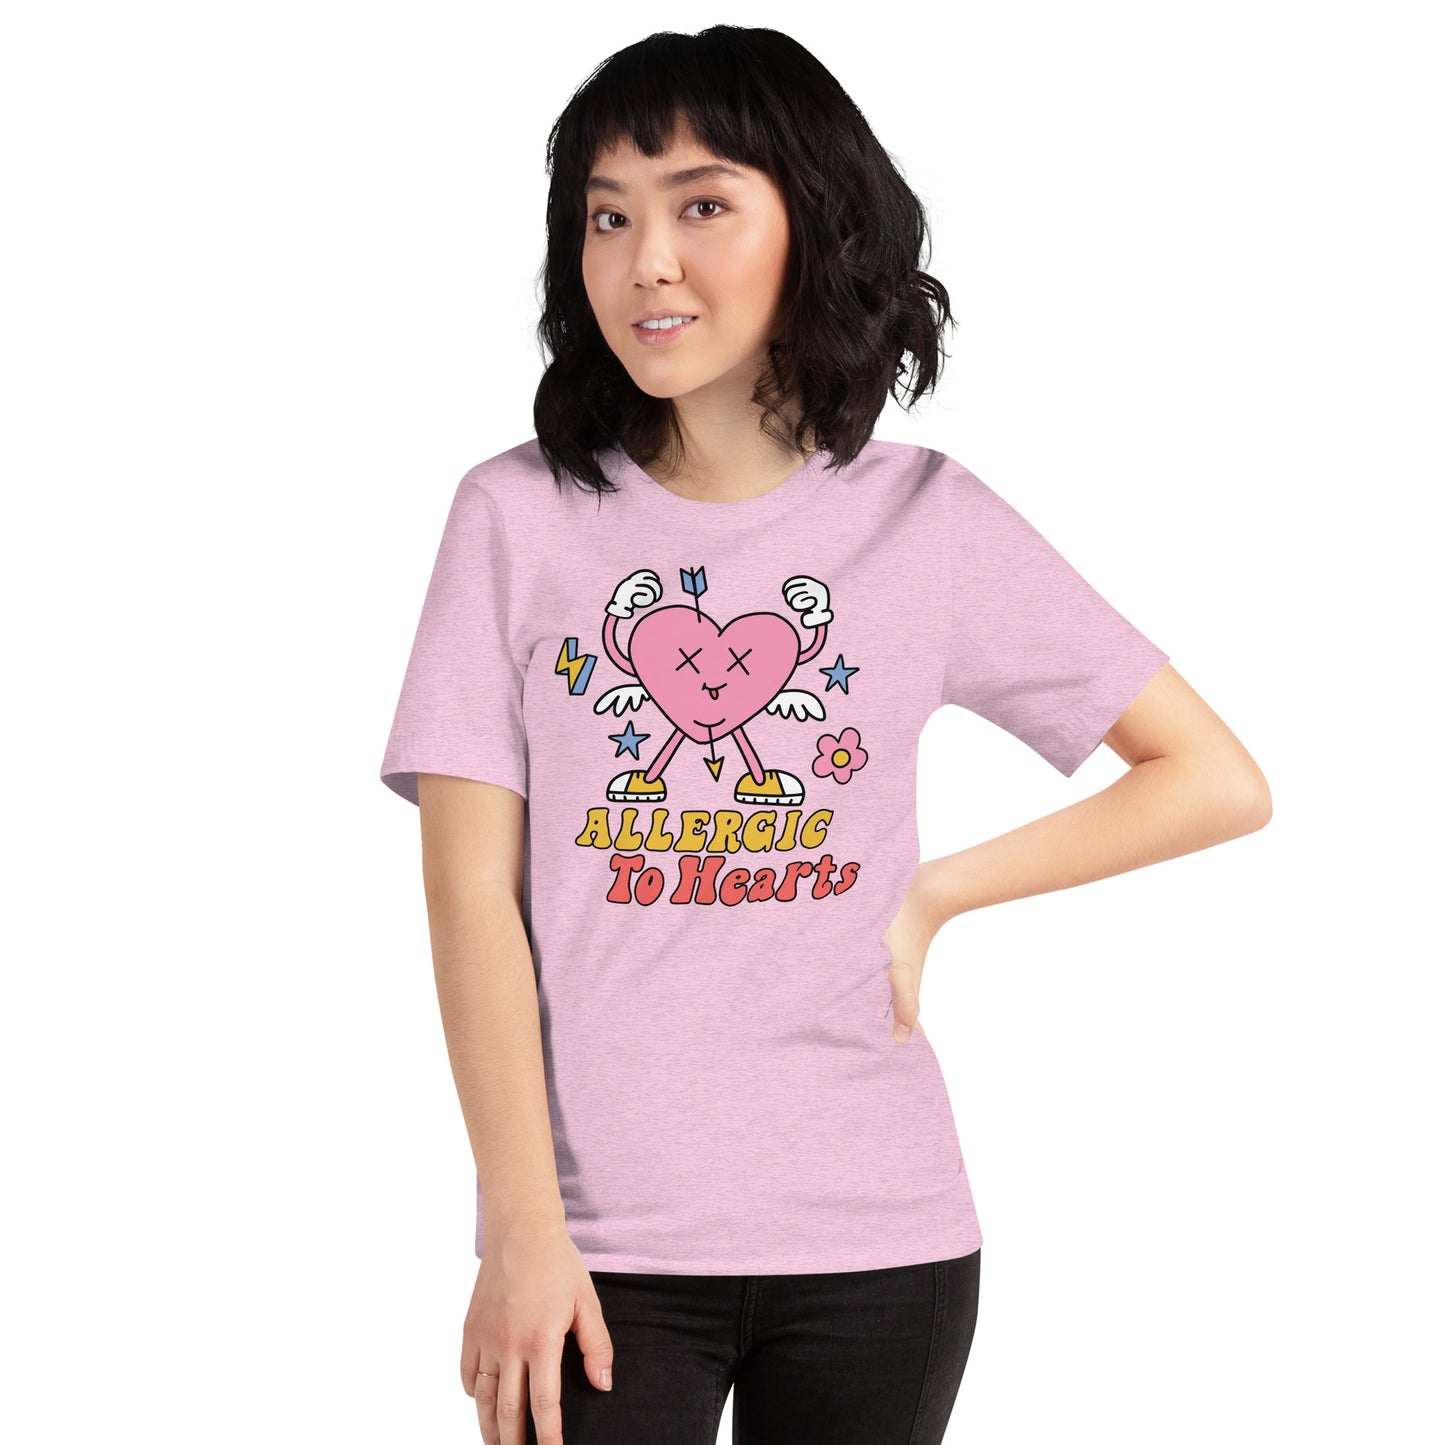 Adult 'Allergic to Hearts' Staple T-shirt